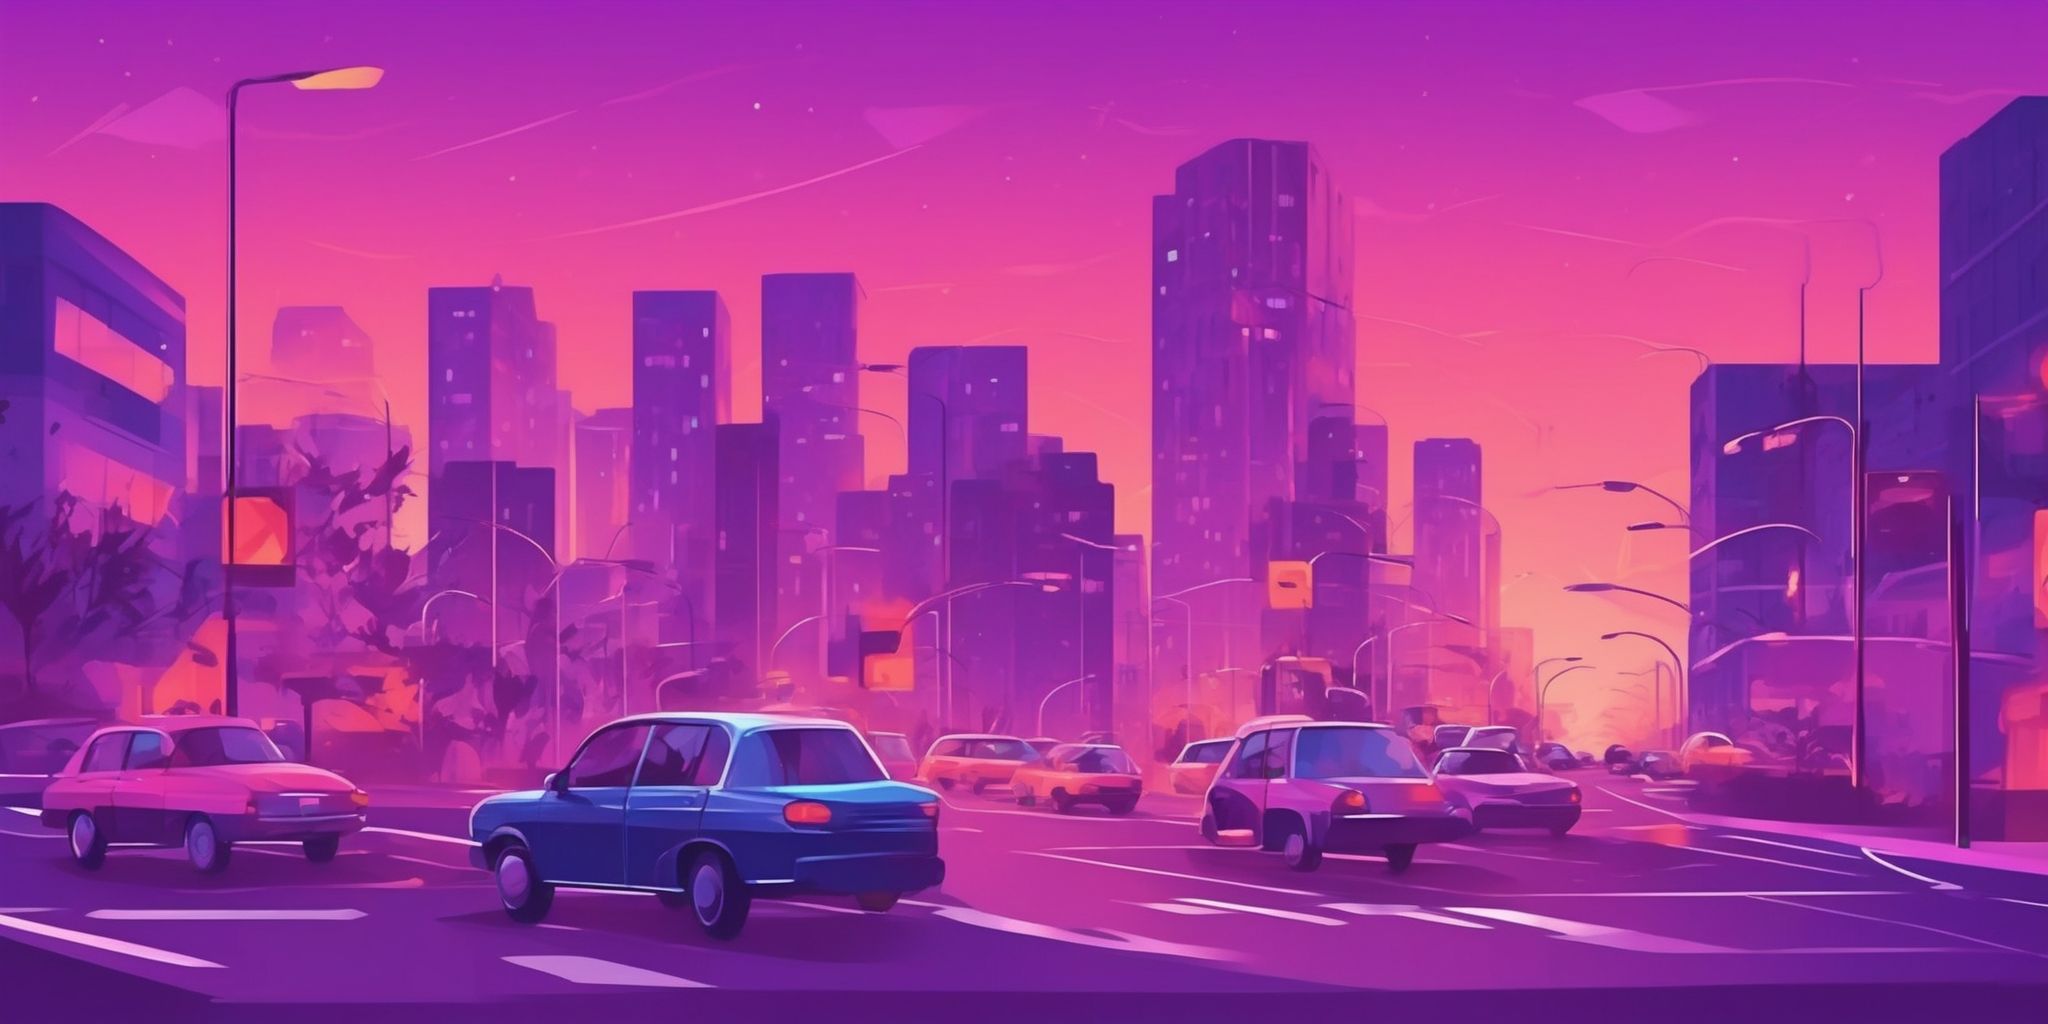 Traffic in flat illustration style, colorful purple gradient colors